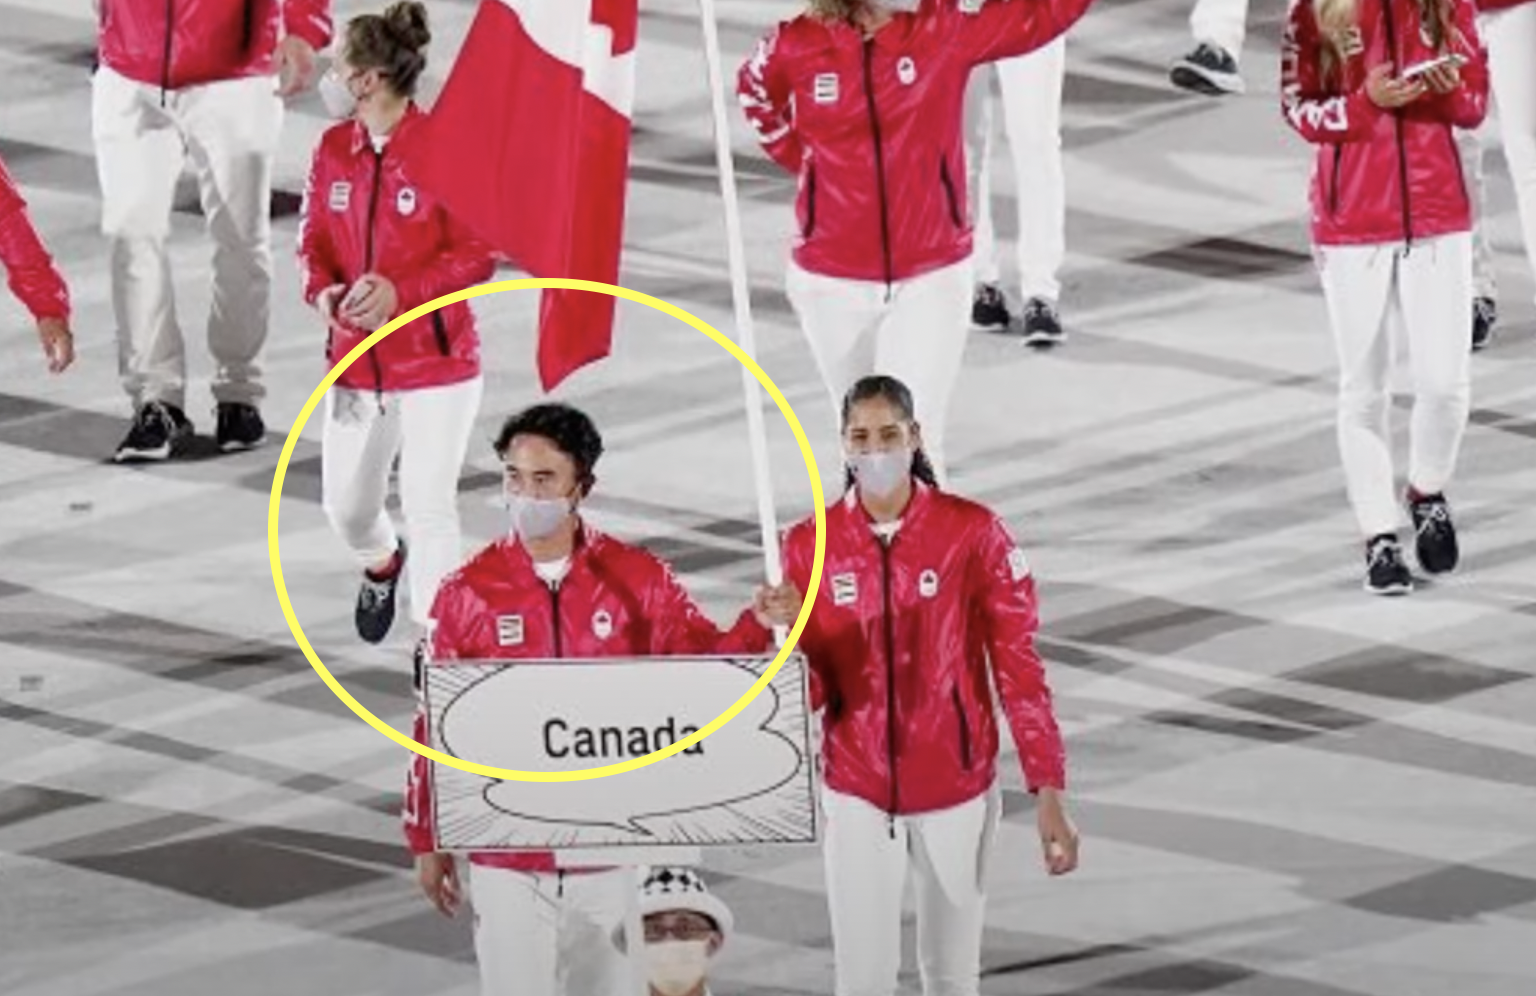 World Rugby share epic montage of Canada's retiring Olympic flag bearer Hirayama